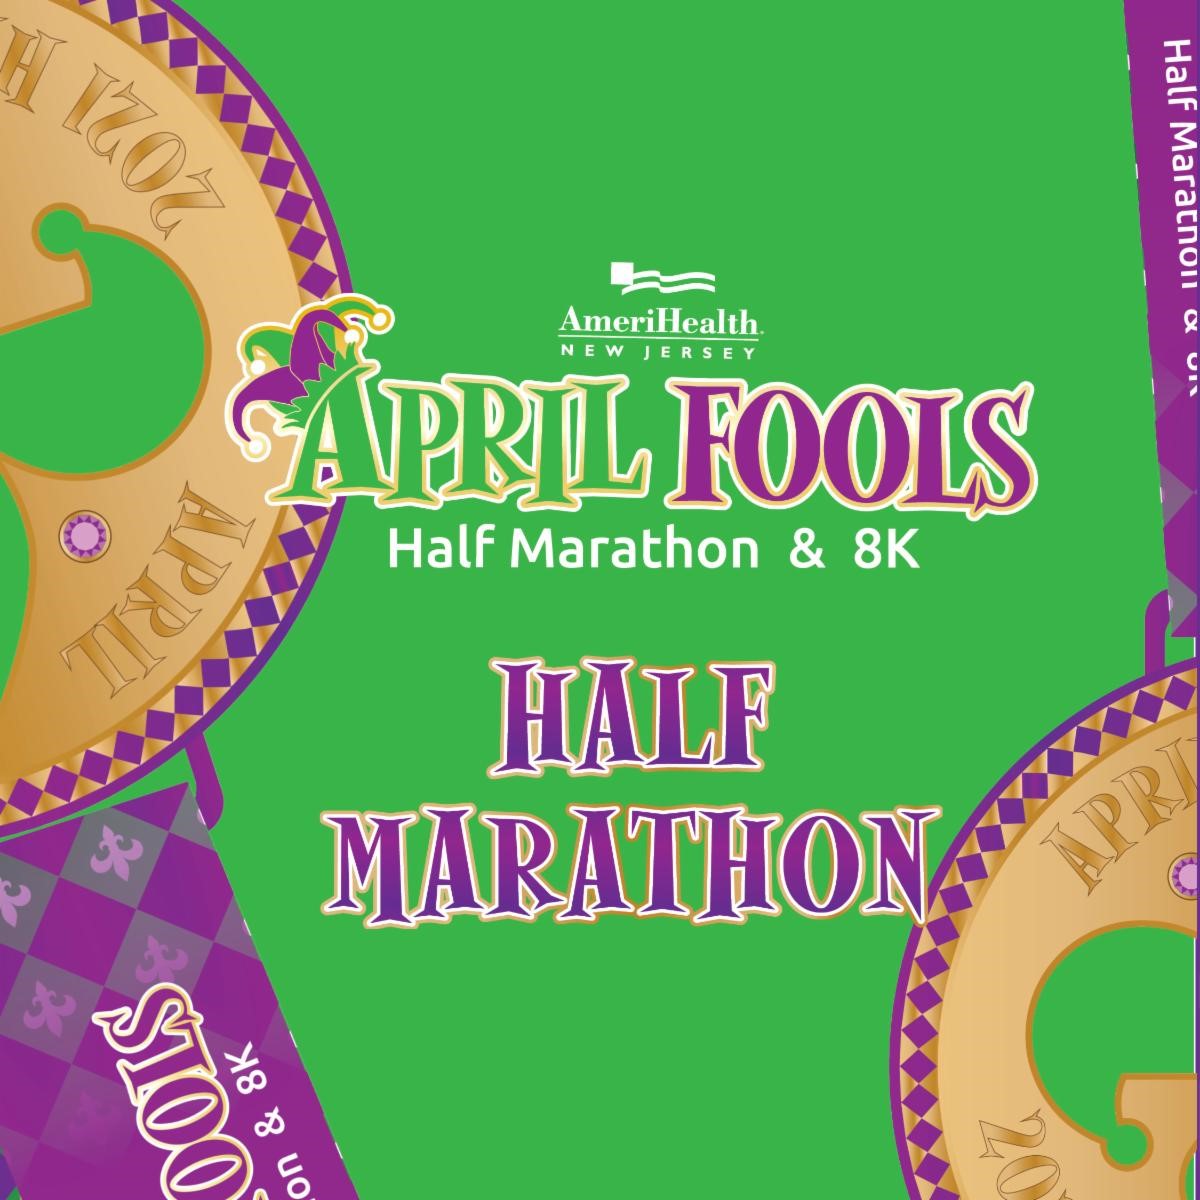 Limited registrations available for April Fools Half Marathon and 8K in